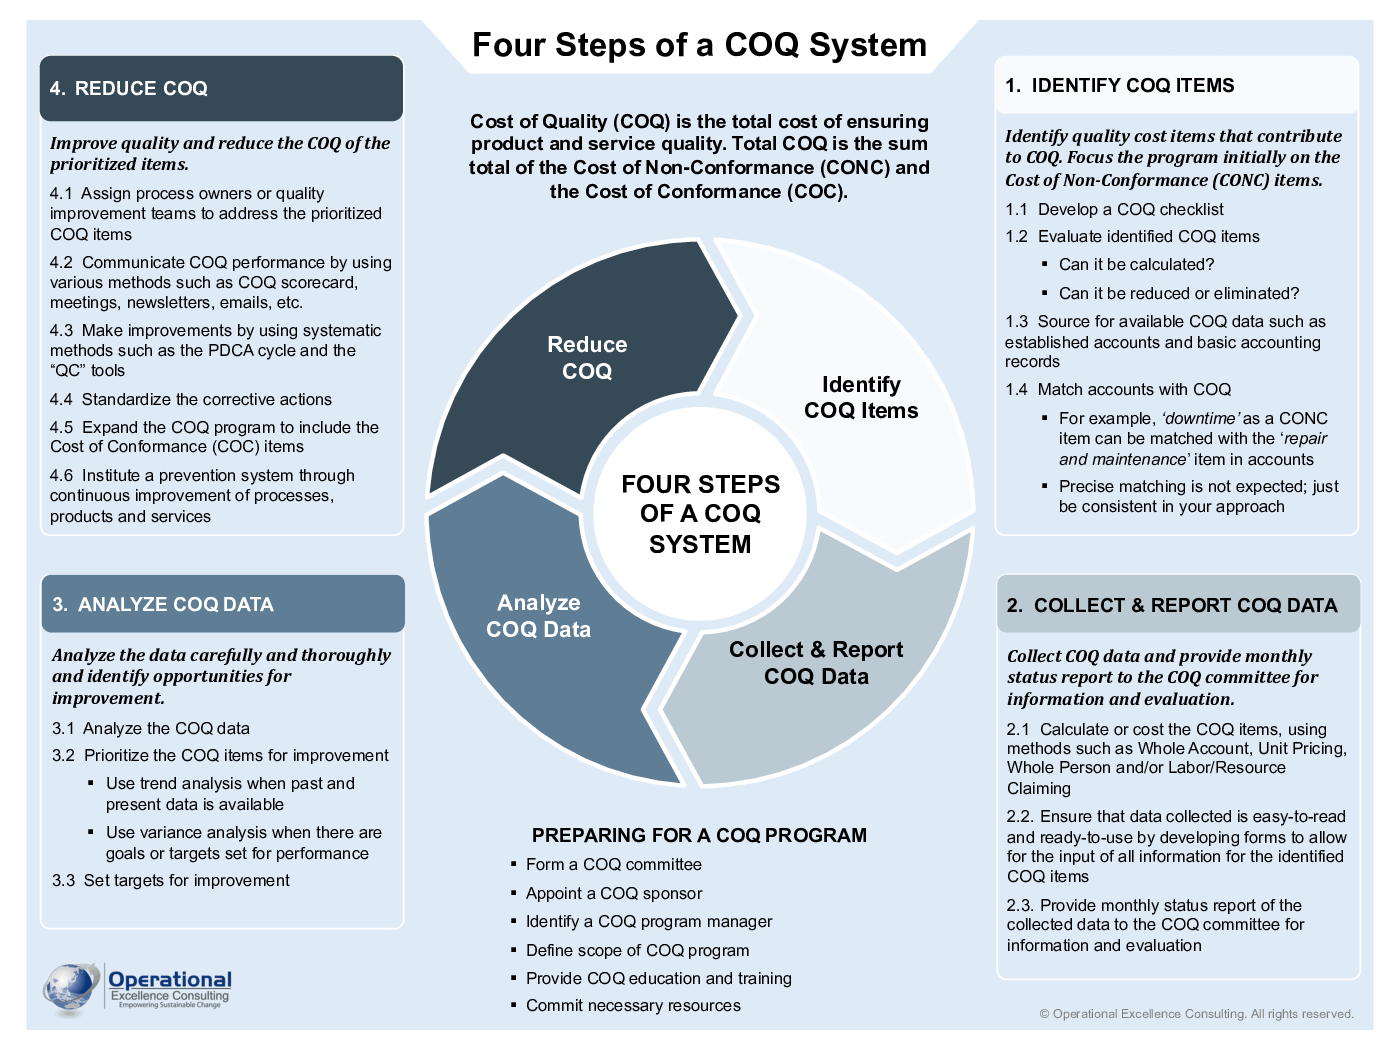 Four Steps of a COQ System Poster (5-page PDF document) Preview Image